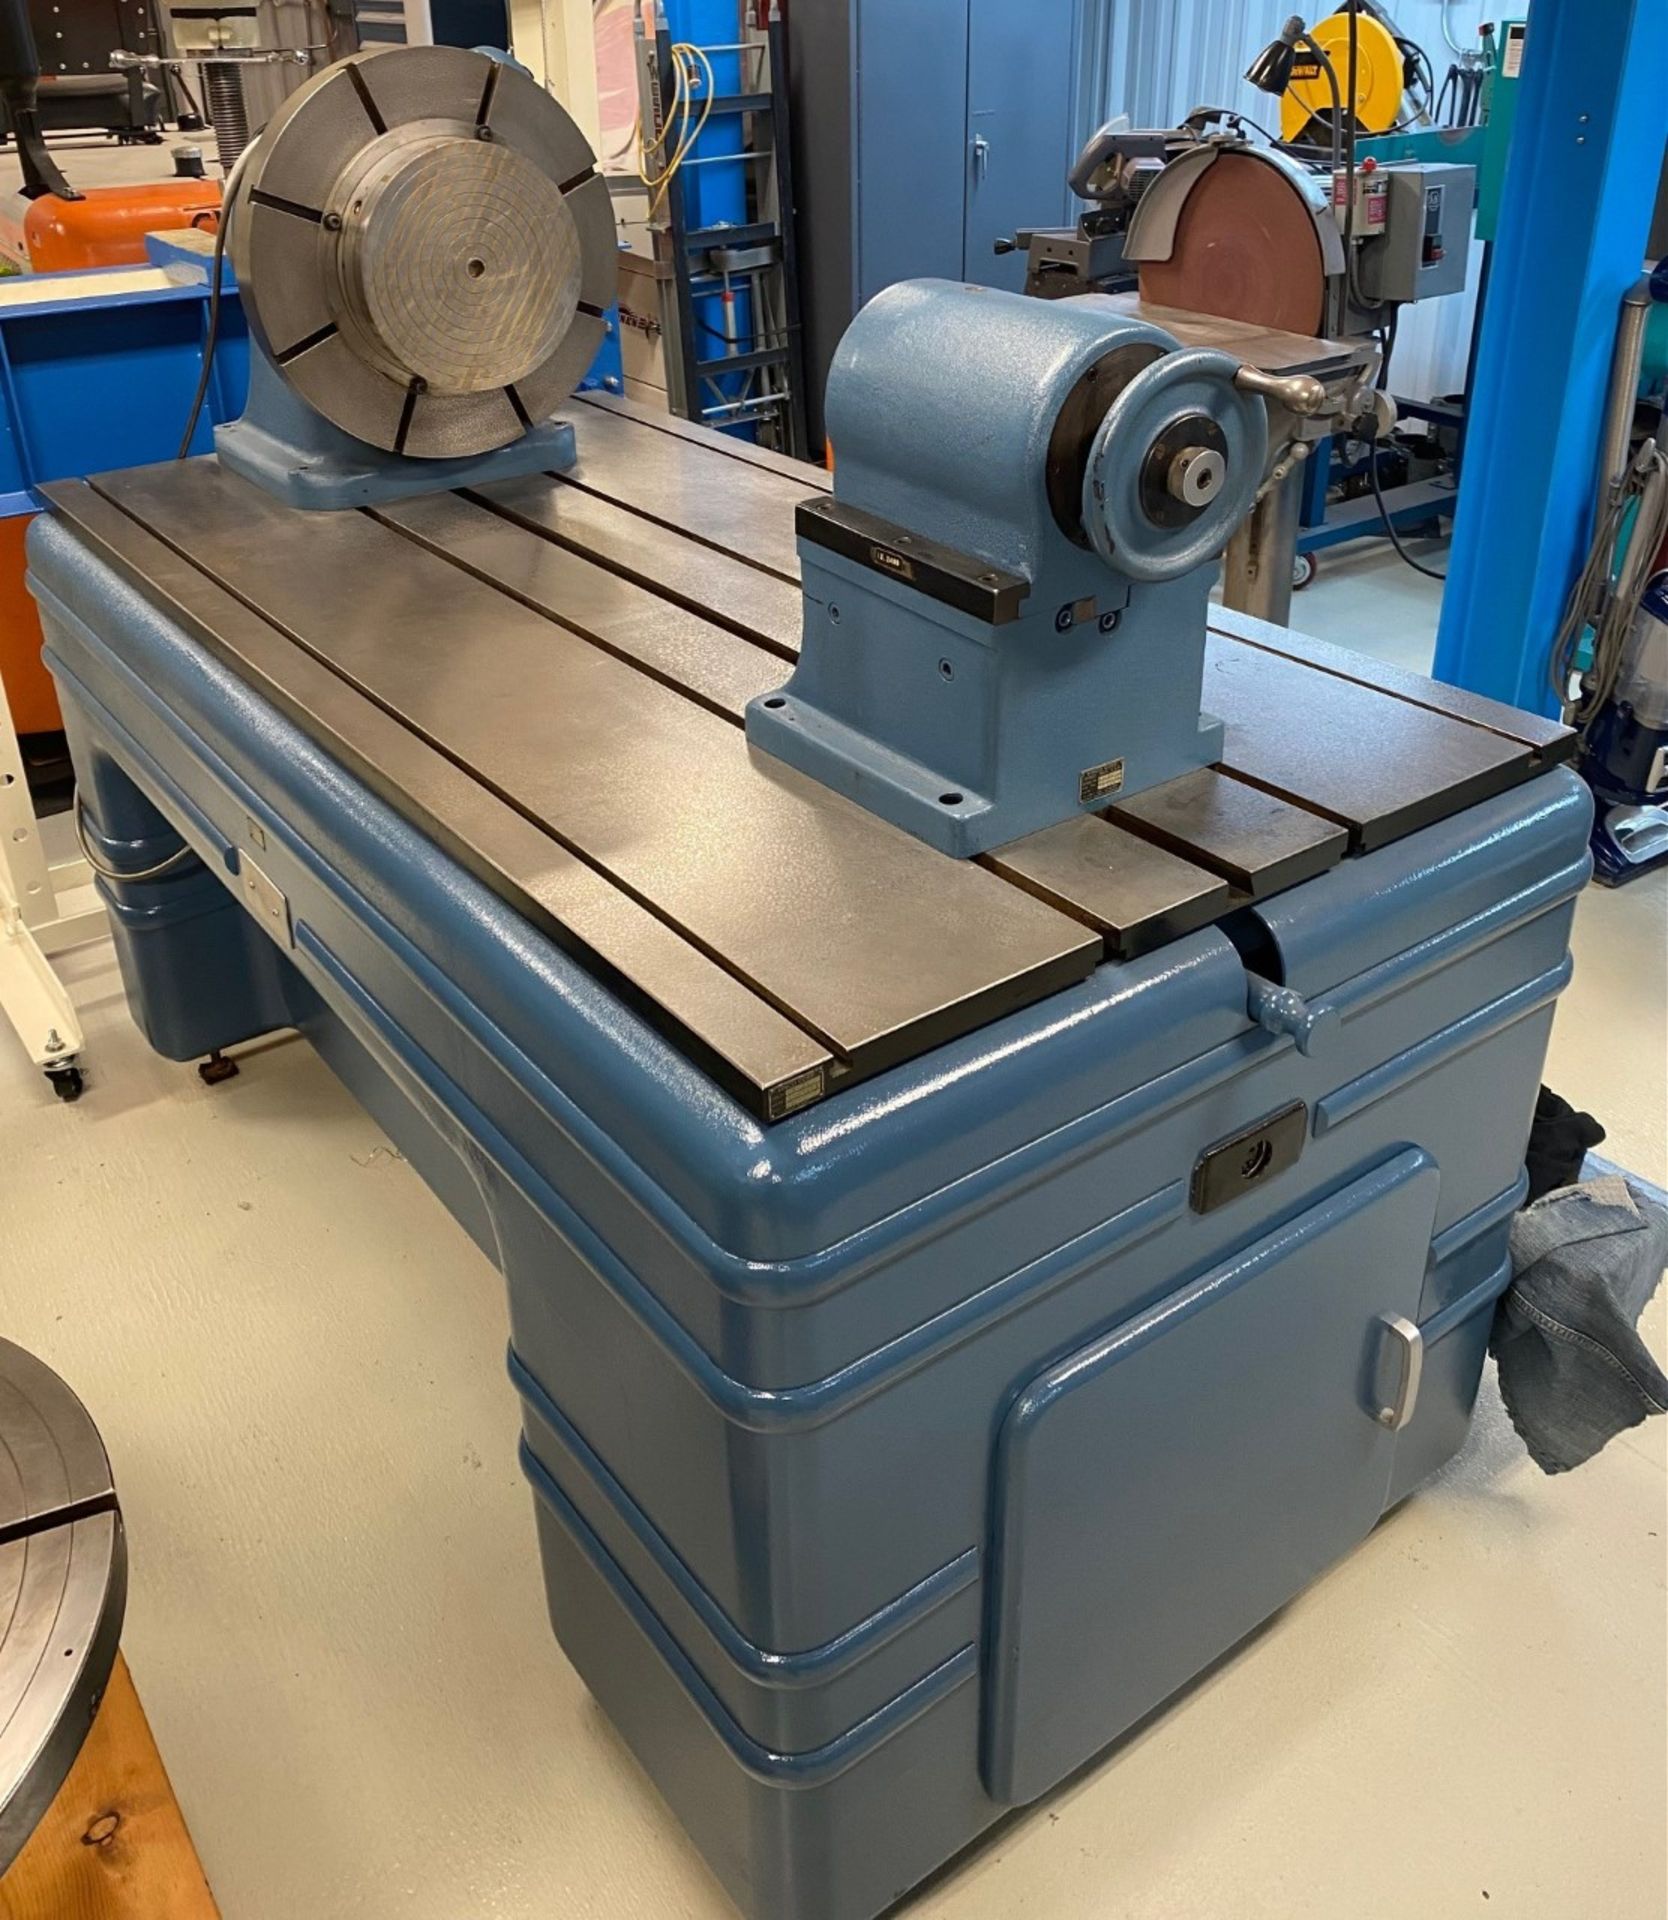 18" Vinco Precision Gear Inspection Unit with: Rotary Table, Tailstock on T-Slotted Base